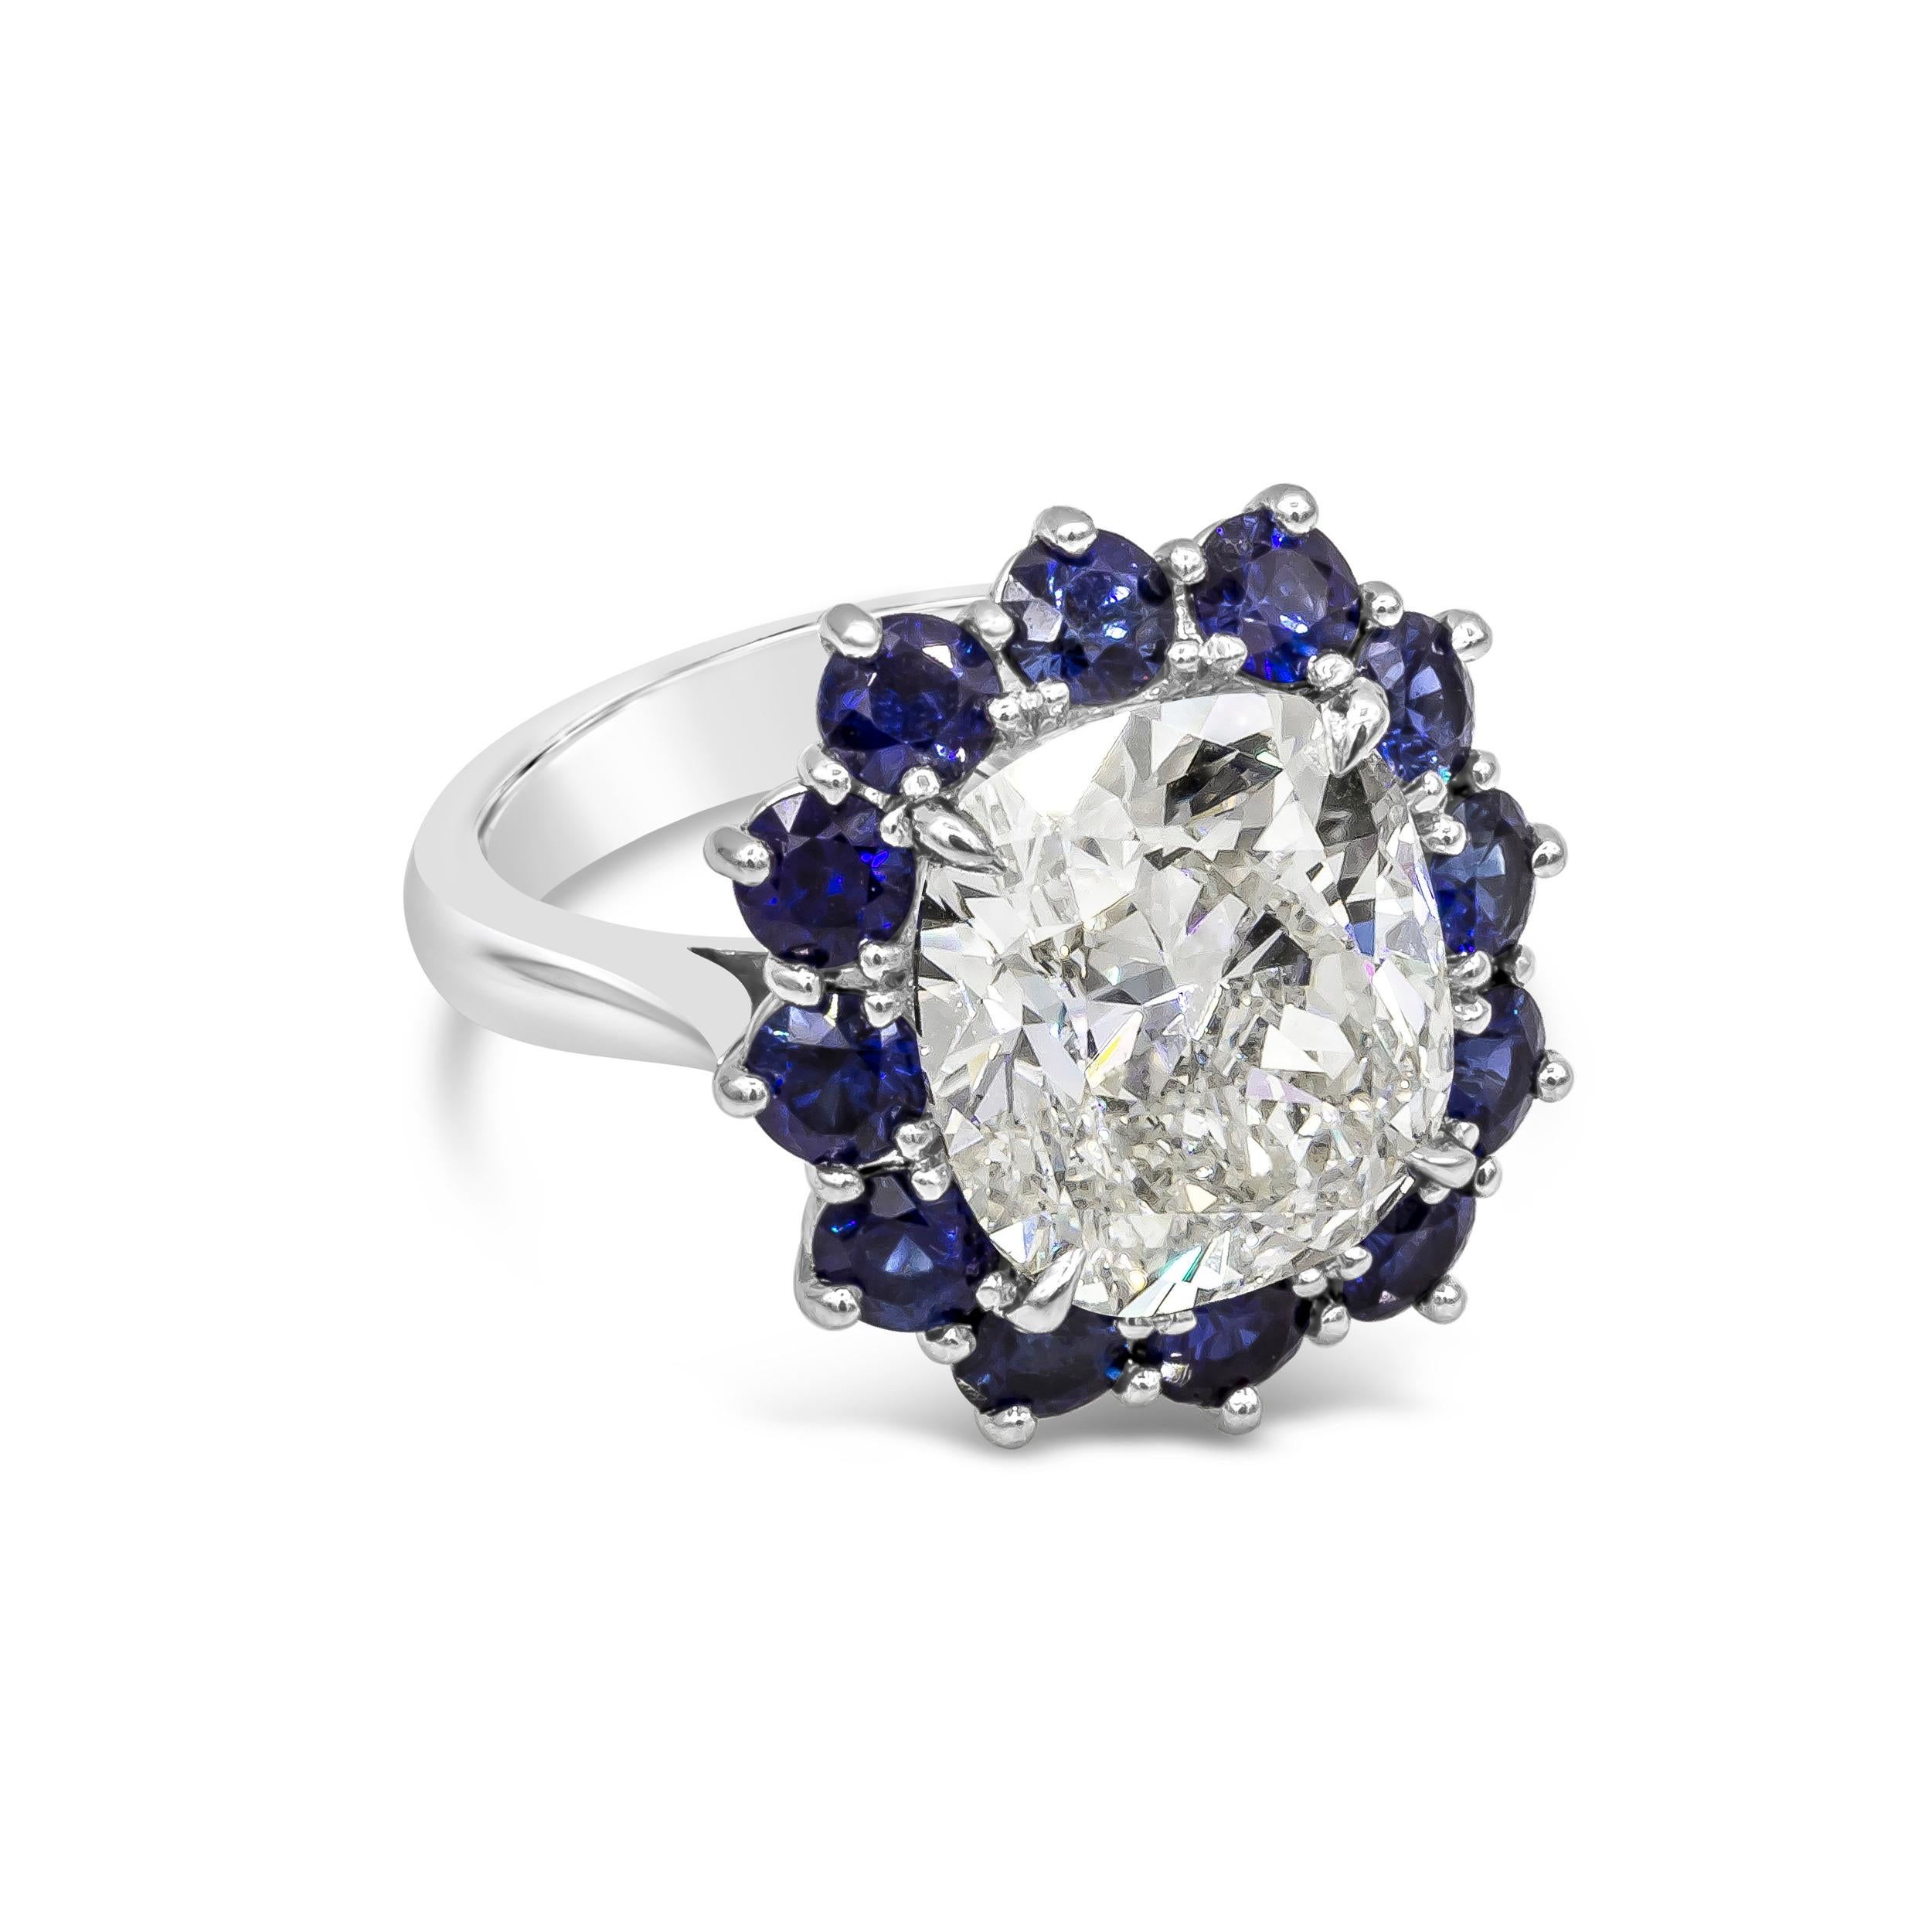 Showcasing a GIA Certified 7.04 carat cushion cut diamond, K Color and SI1 in Clarity. Surrounded by a single row of round cut blue sapphires. Sapphires weigh 2.60 carats total. Made with Platinum. Size 6.25 US 

